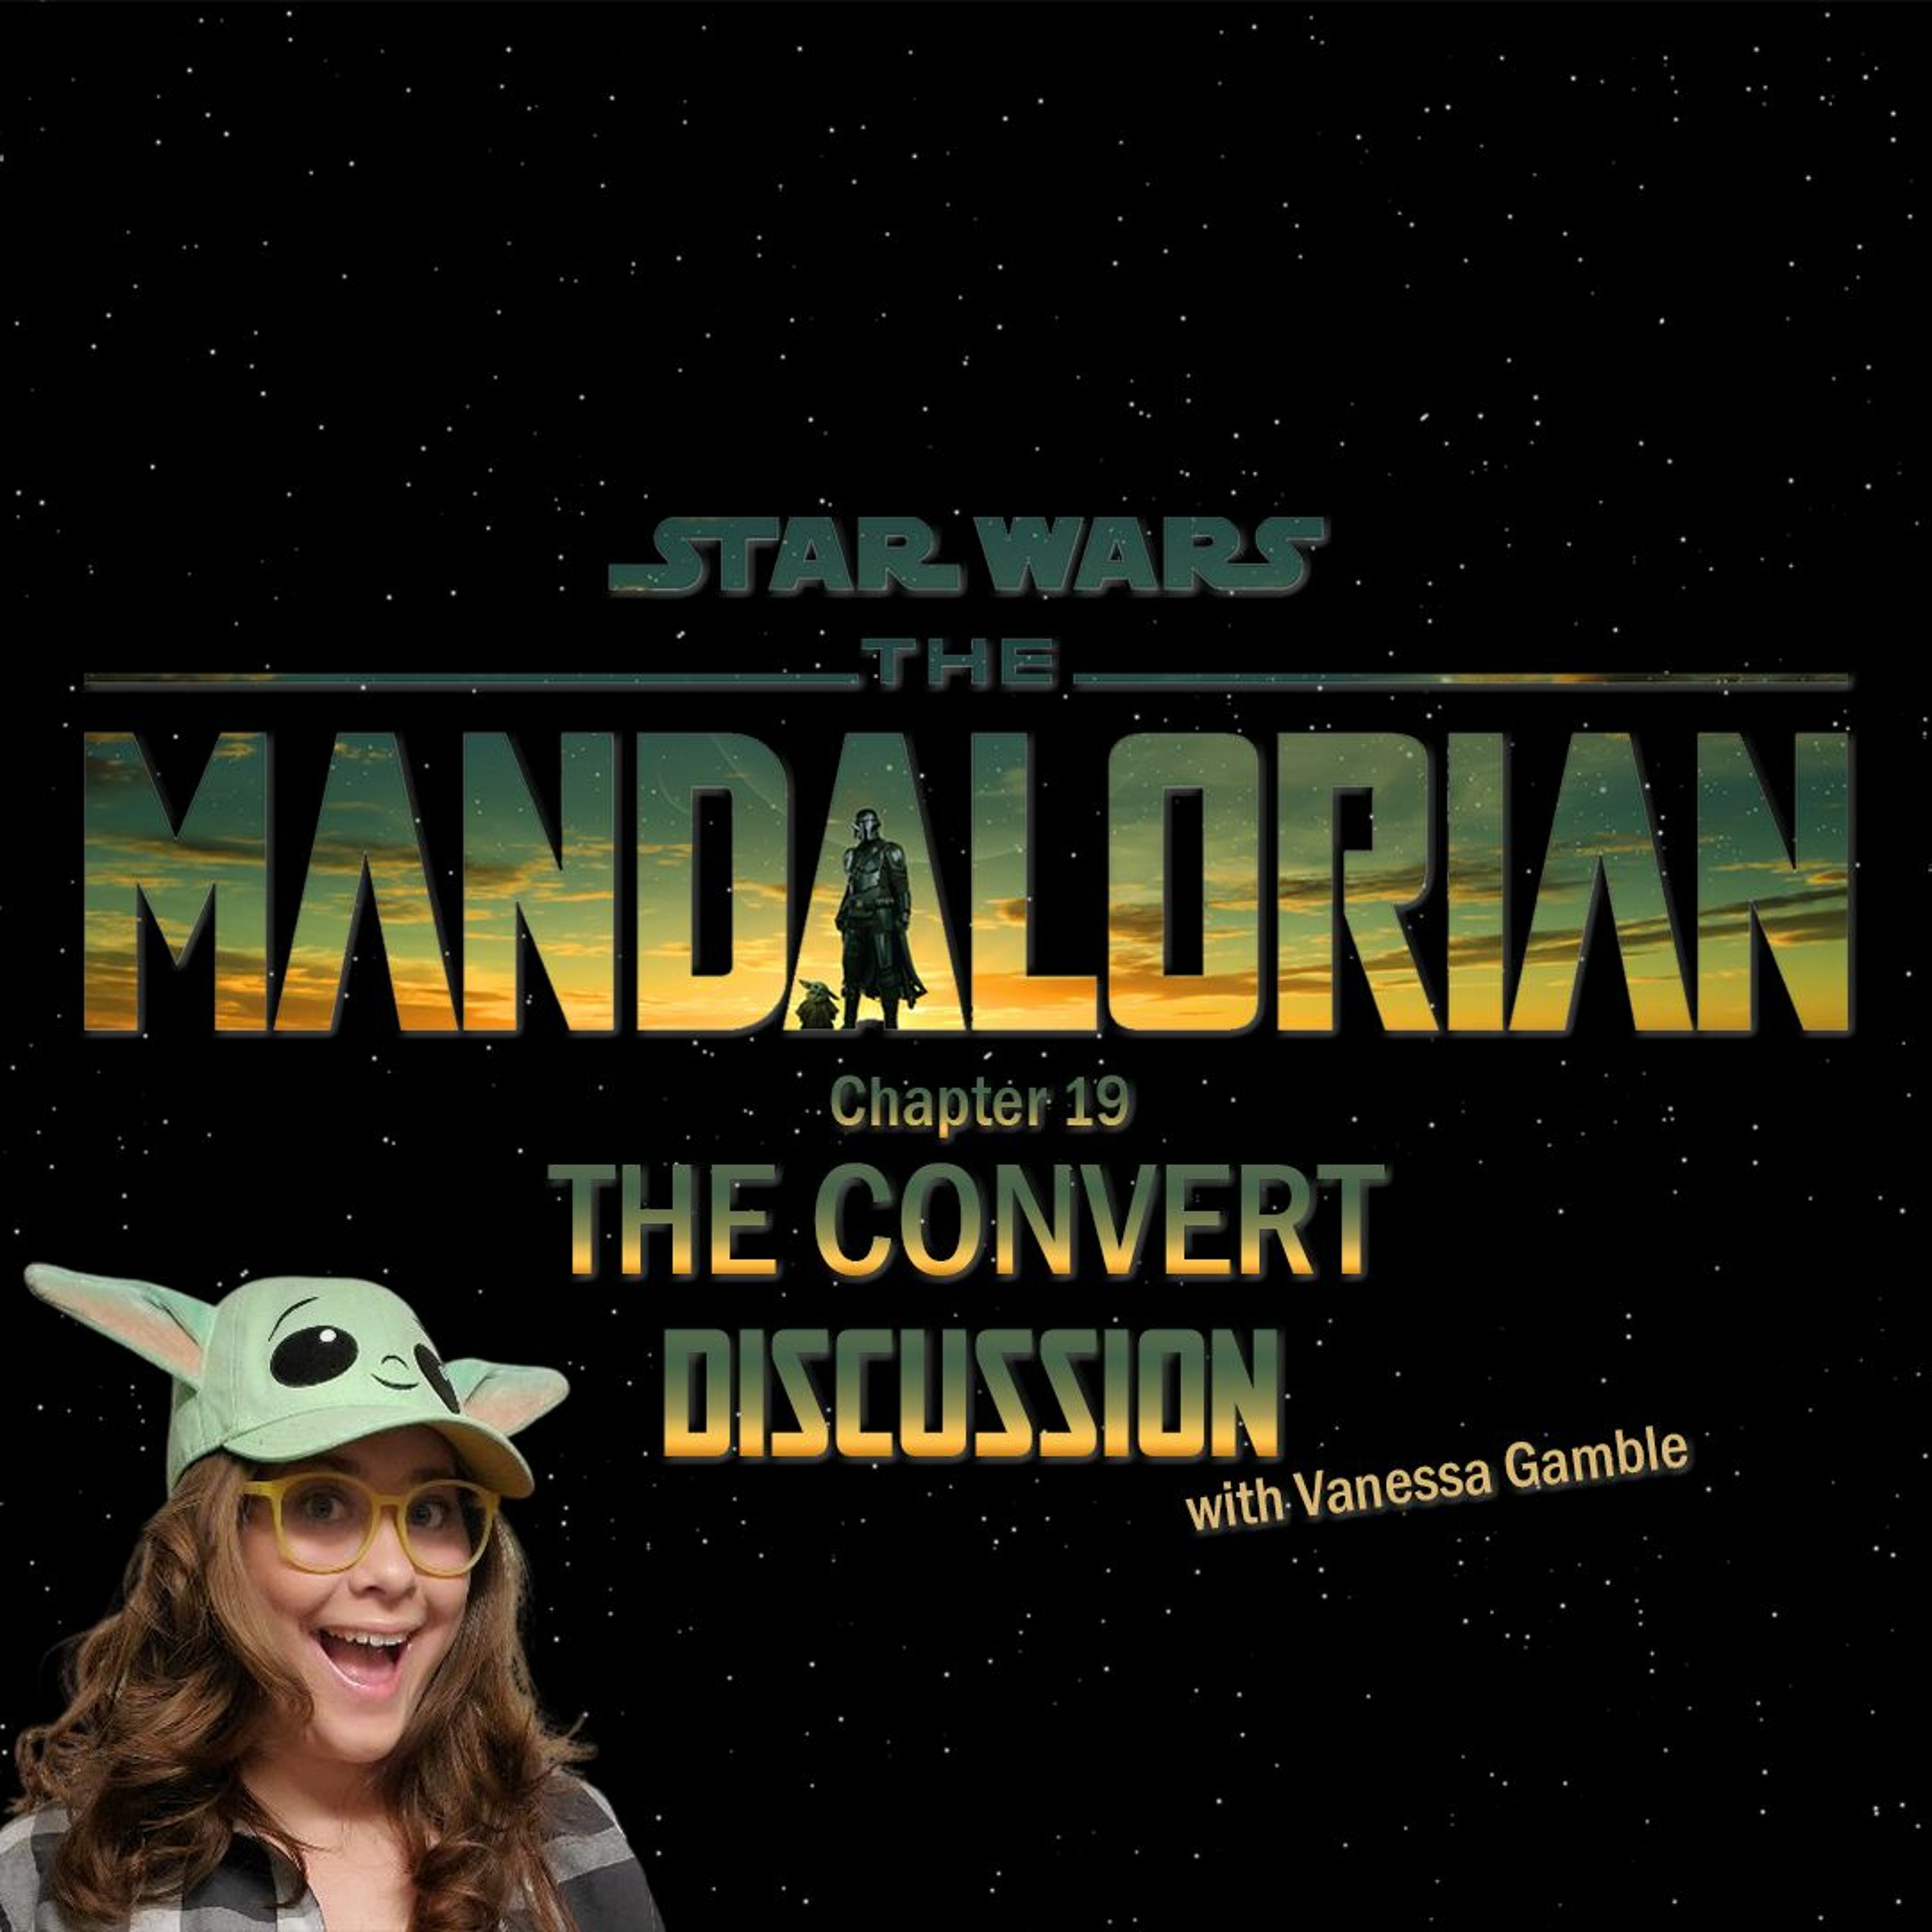 The Mandalorian Chapter 19: The Convert (with Vanessa Gamble)